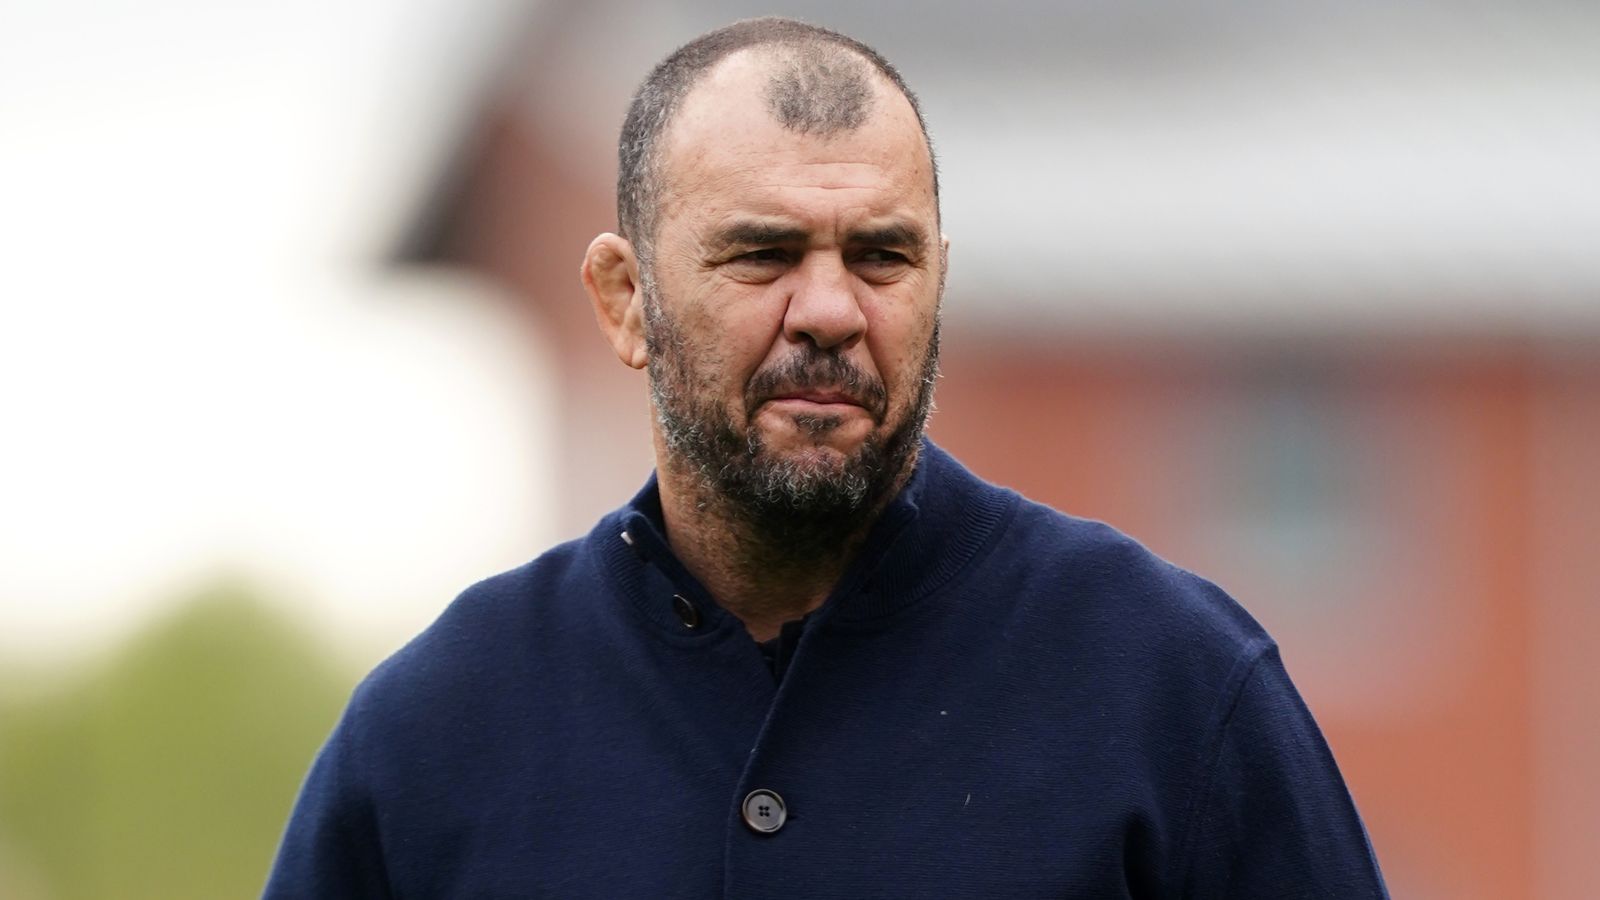 rugby-league-world-cup-we-re-doing-part-time-security-work-michael-cheika-reveals-lebanon-hotel-break-ins